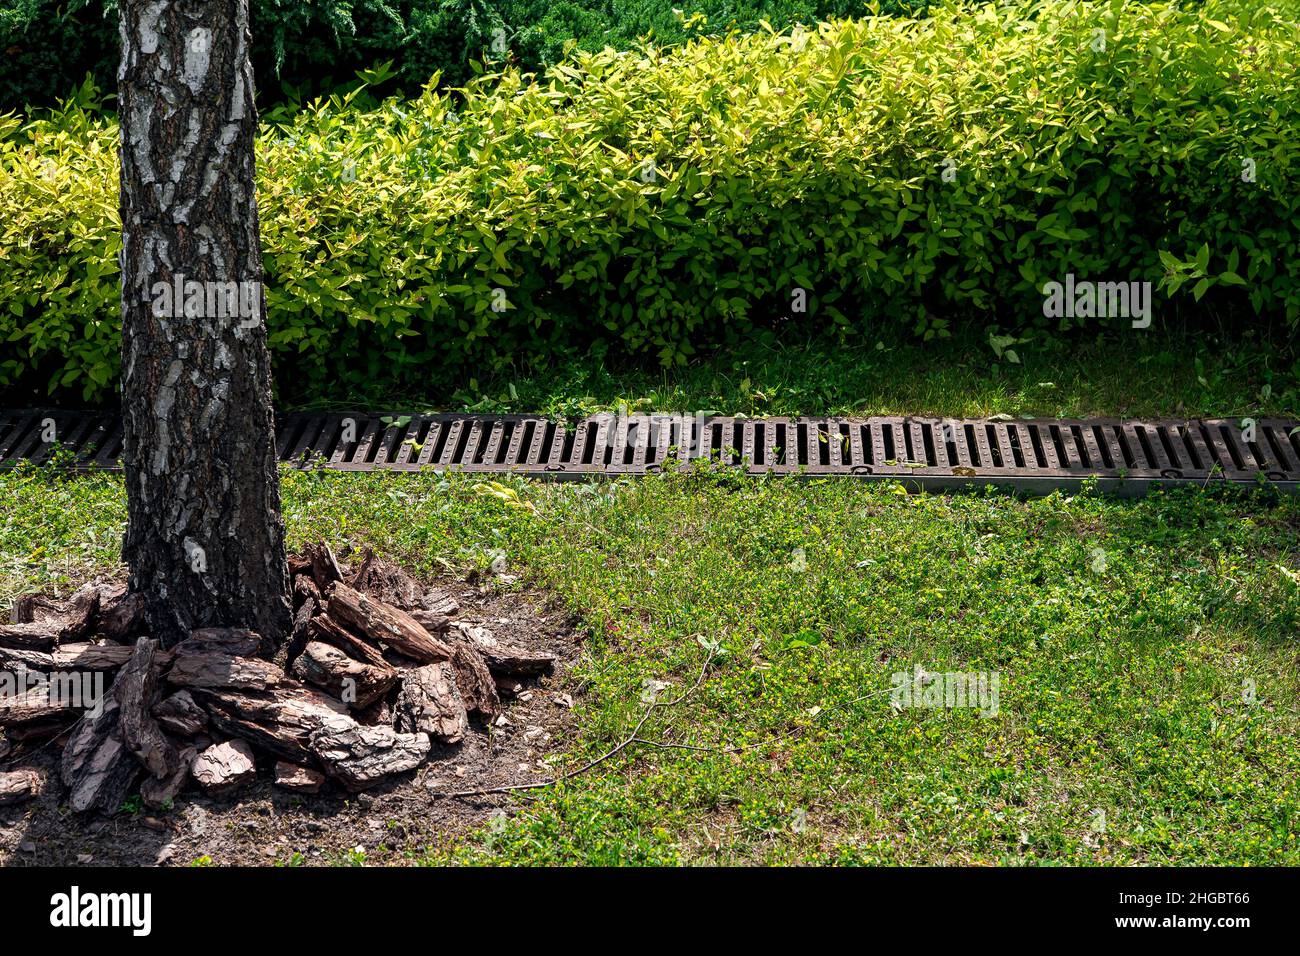 catch basin grate on lawn with green grass and bushes in backyard garden with tree trunk bark and mulching, rainwater drainage system in park among pl Stock Photo